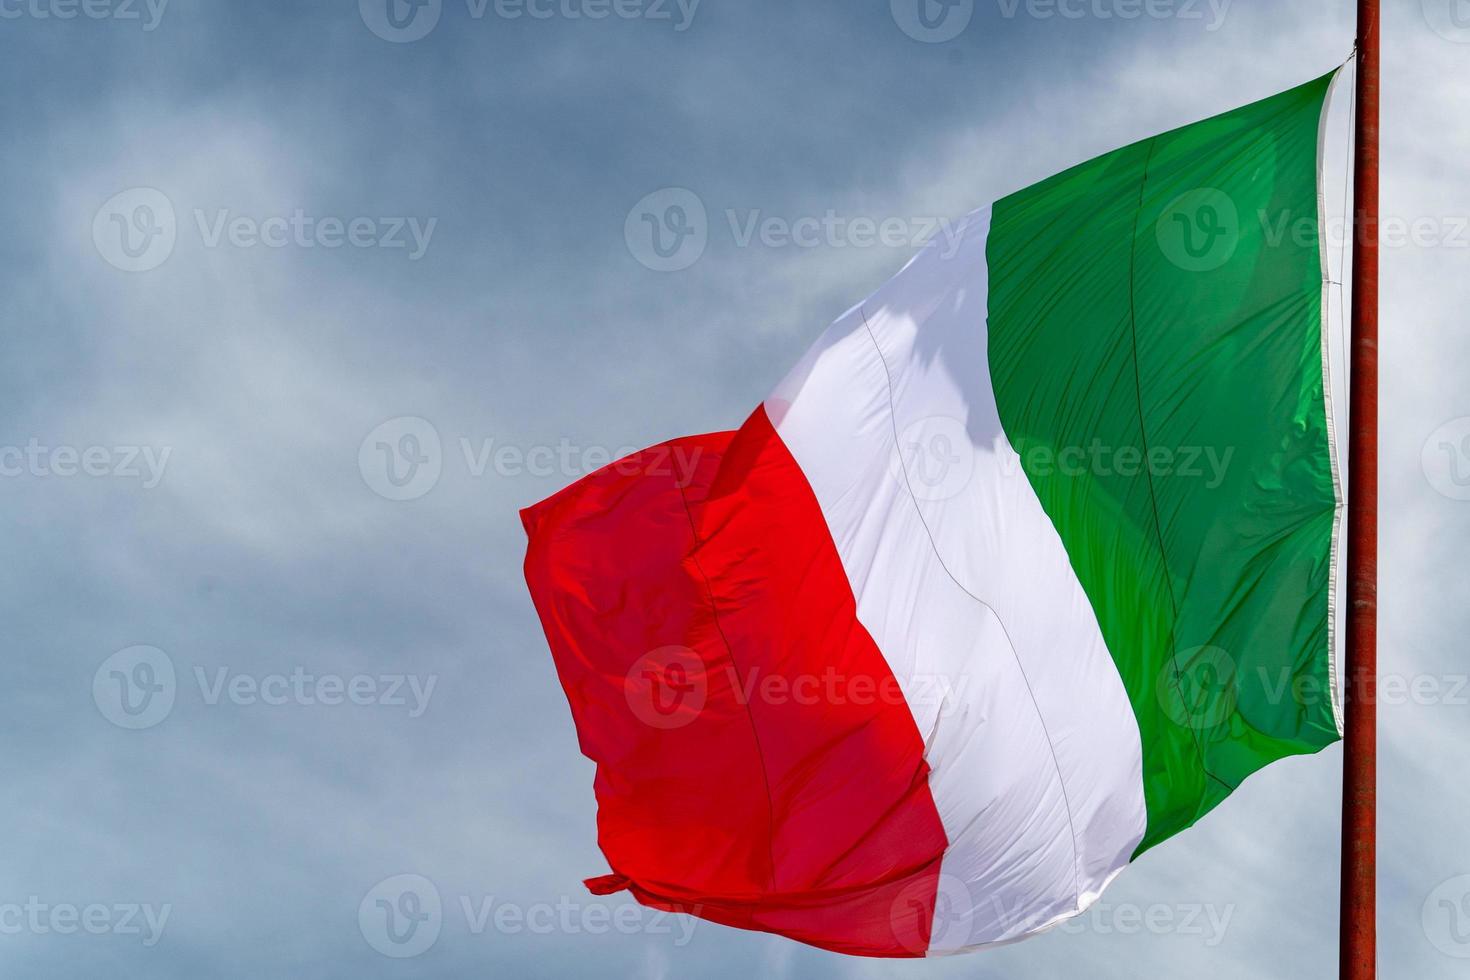 Italian flag of Italy green white and red in rome photo